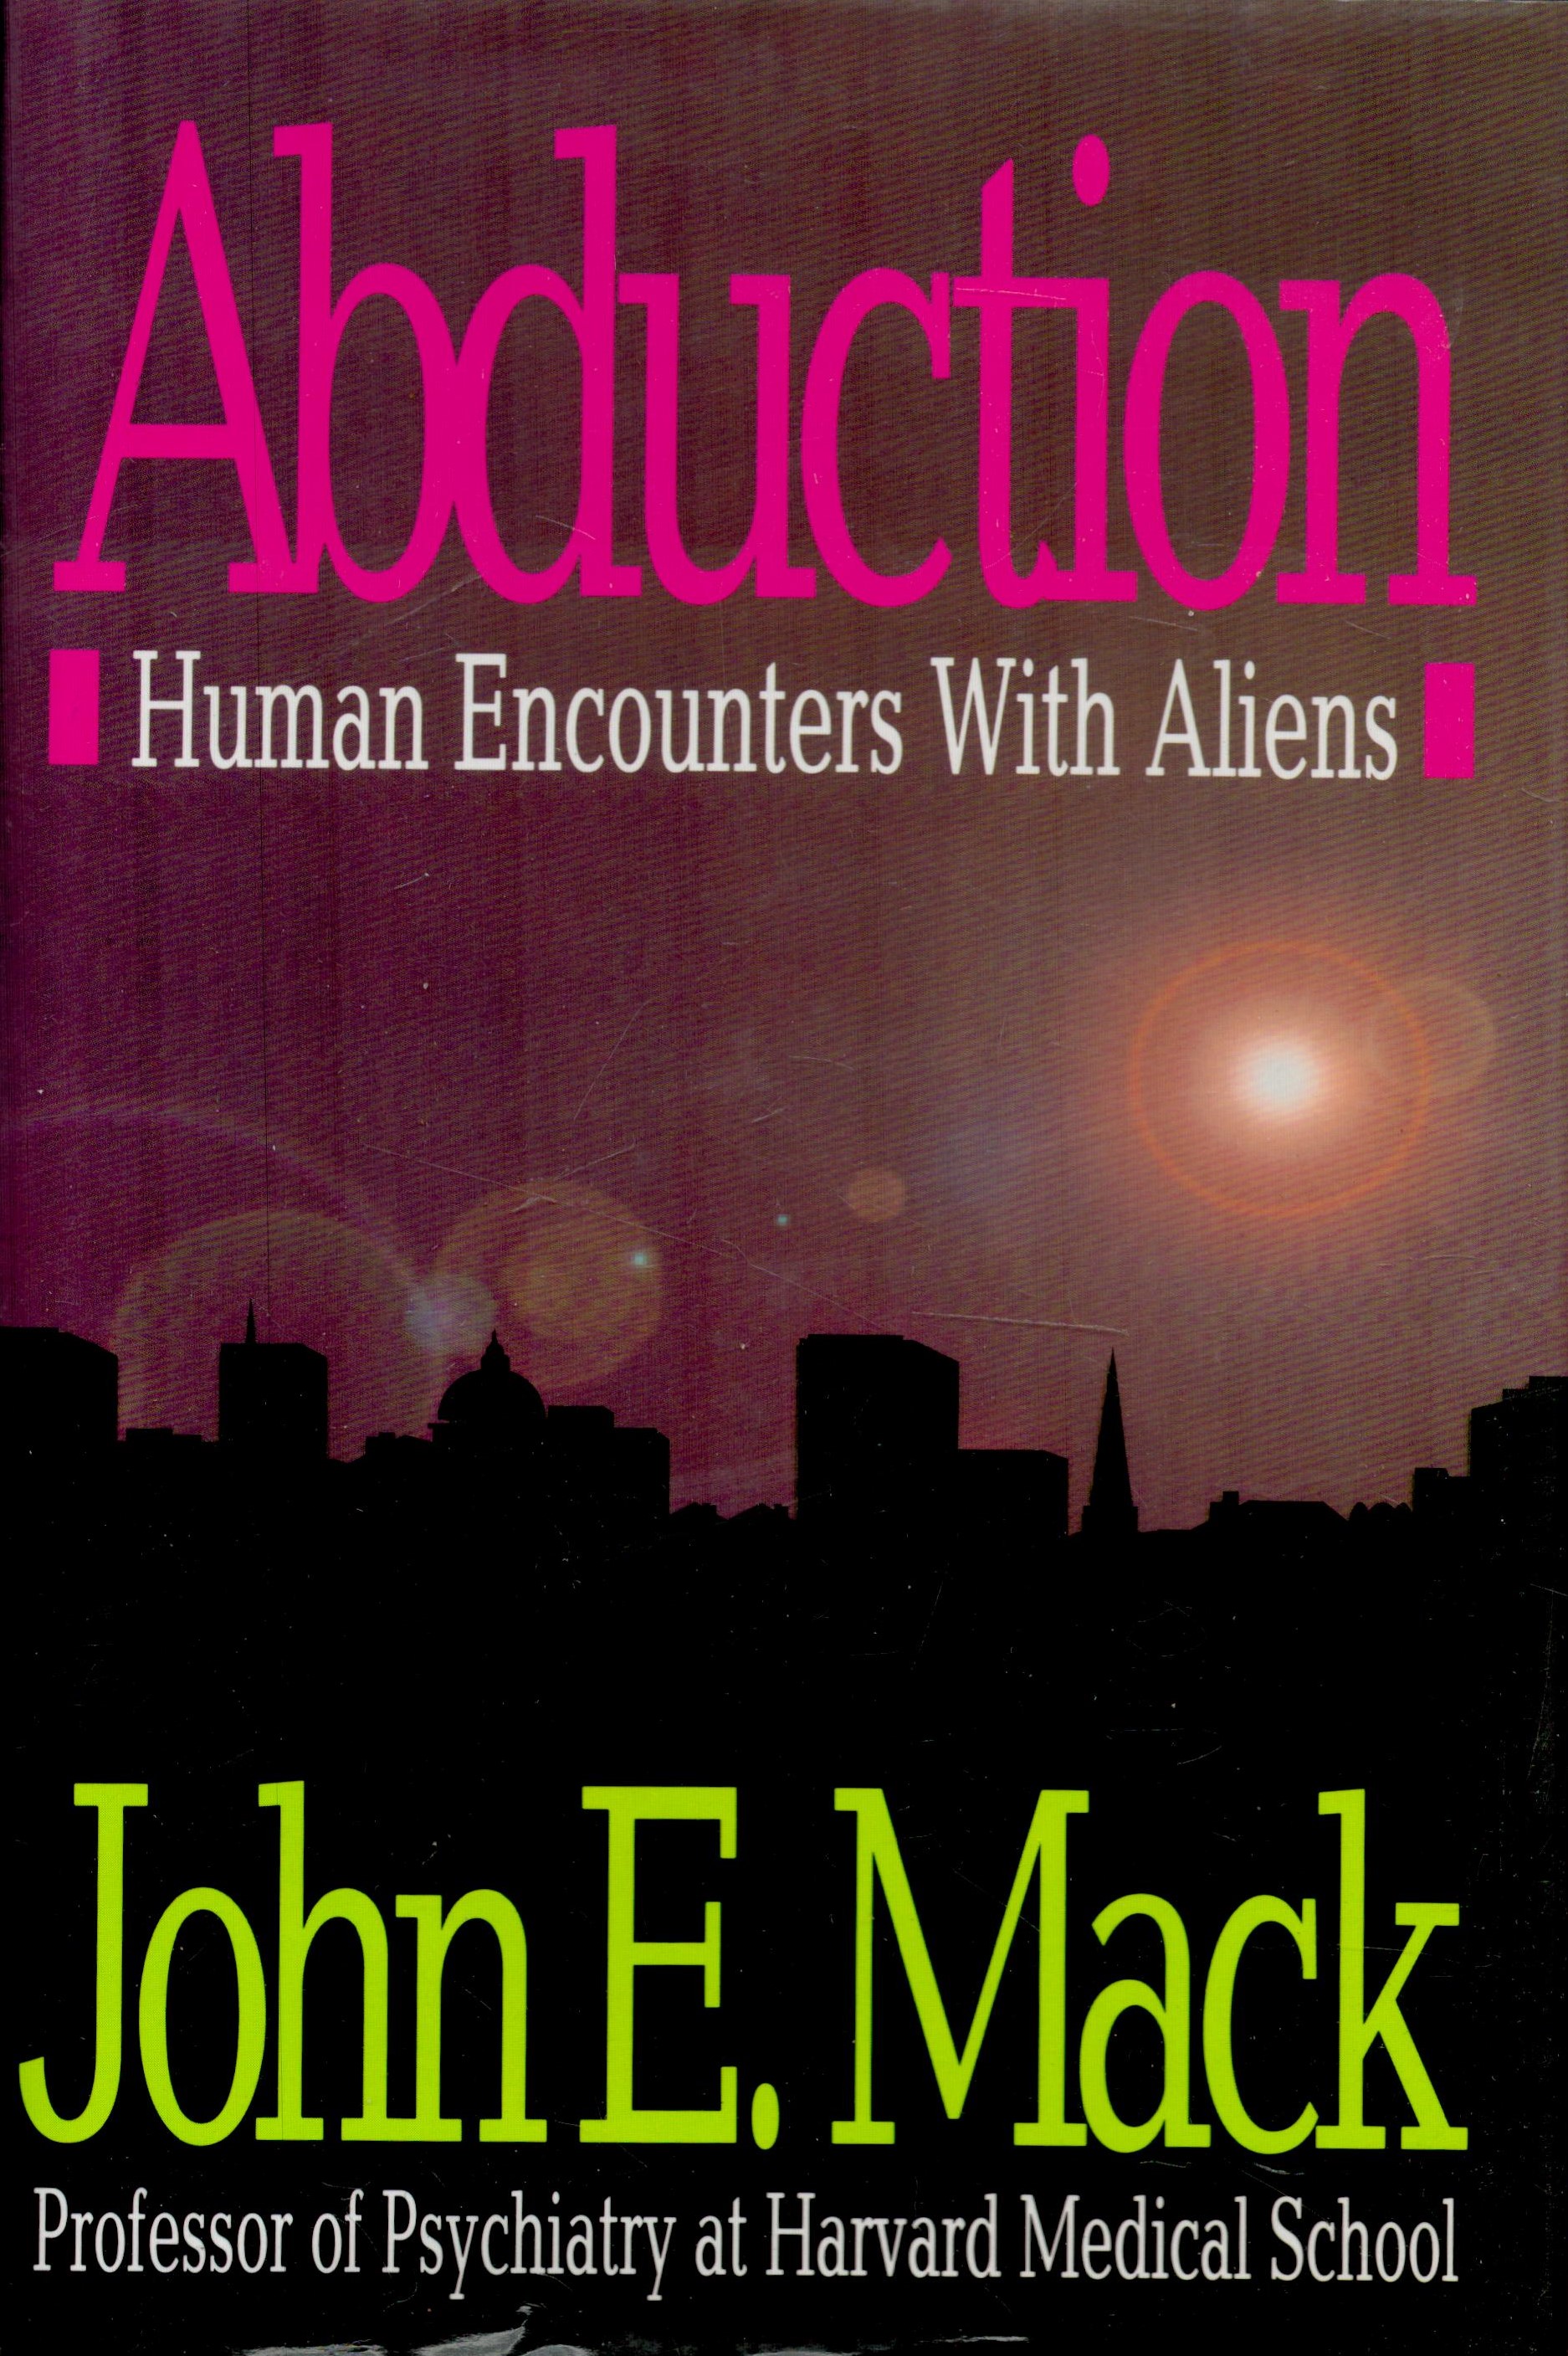 Abduction - Human Encounters with Aliens by John E Mack 1994 First Edition Hardback Book with 432